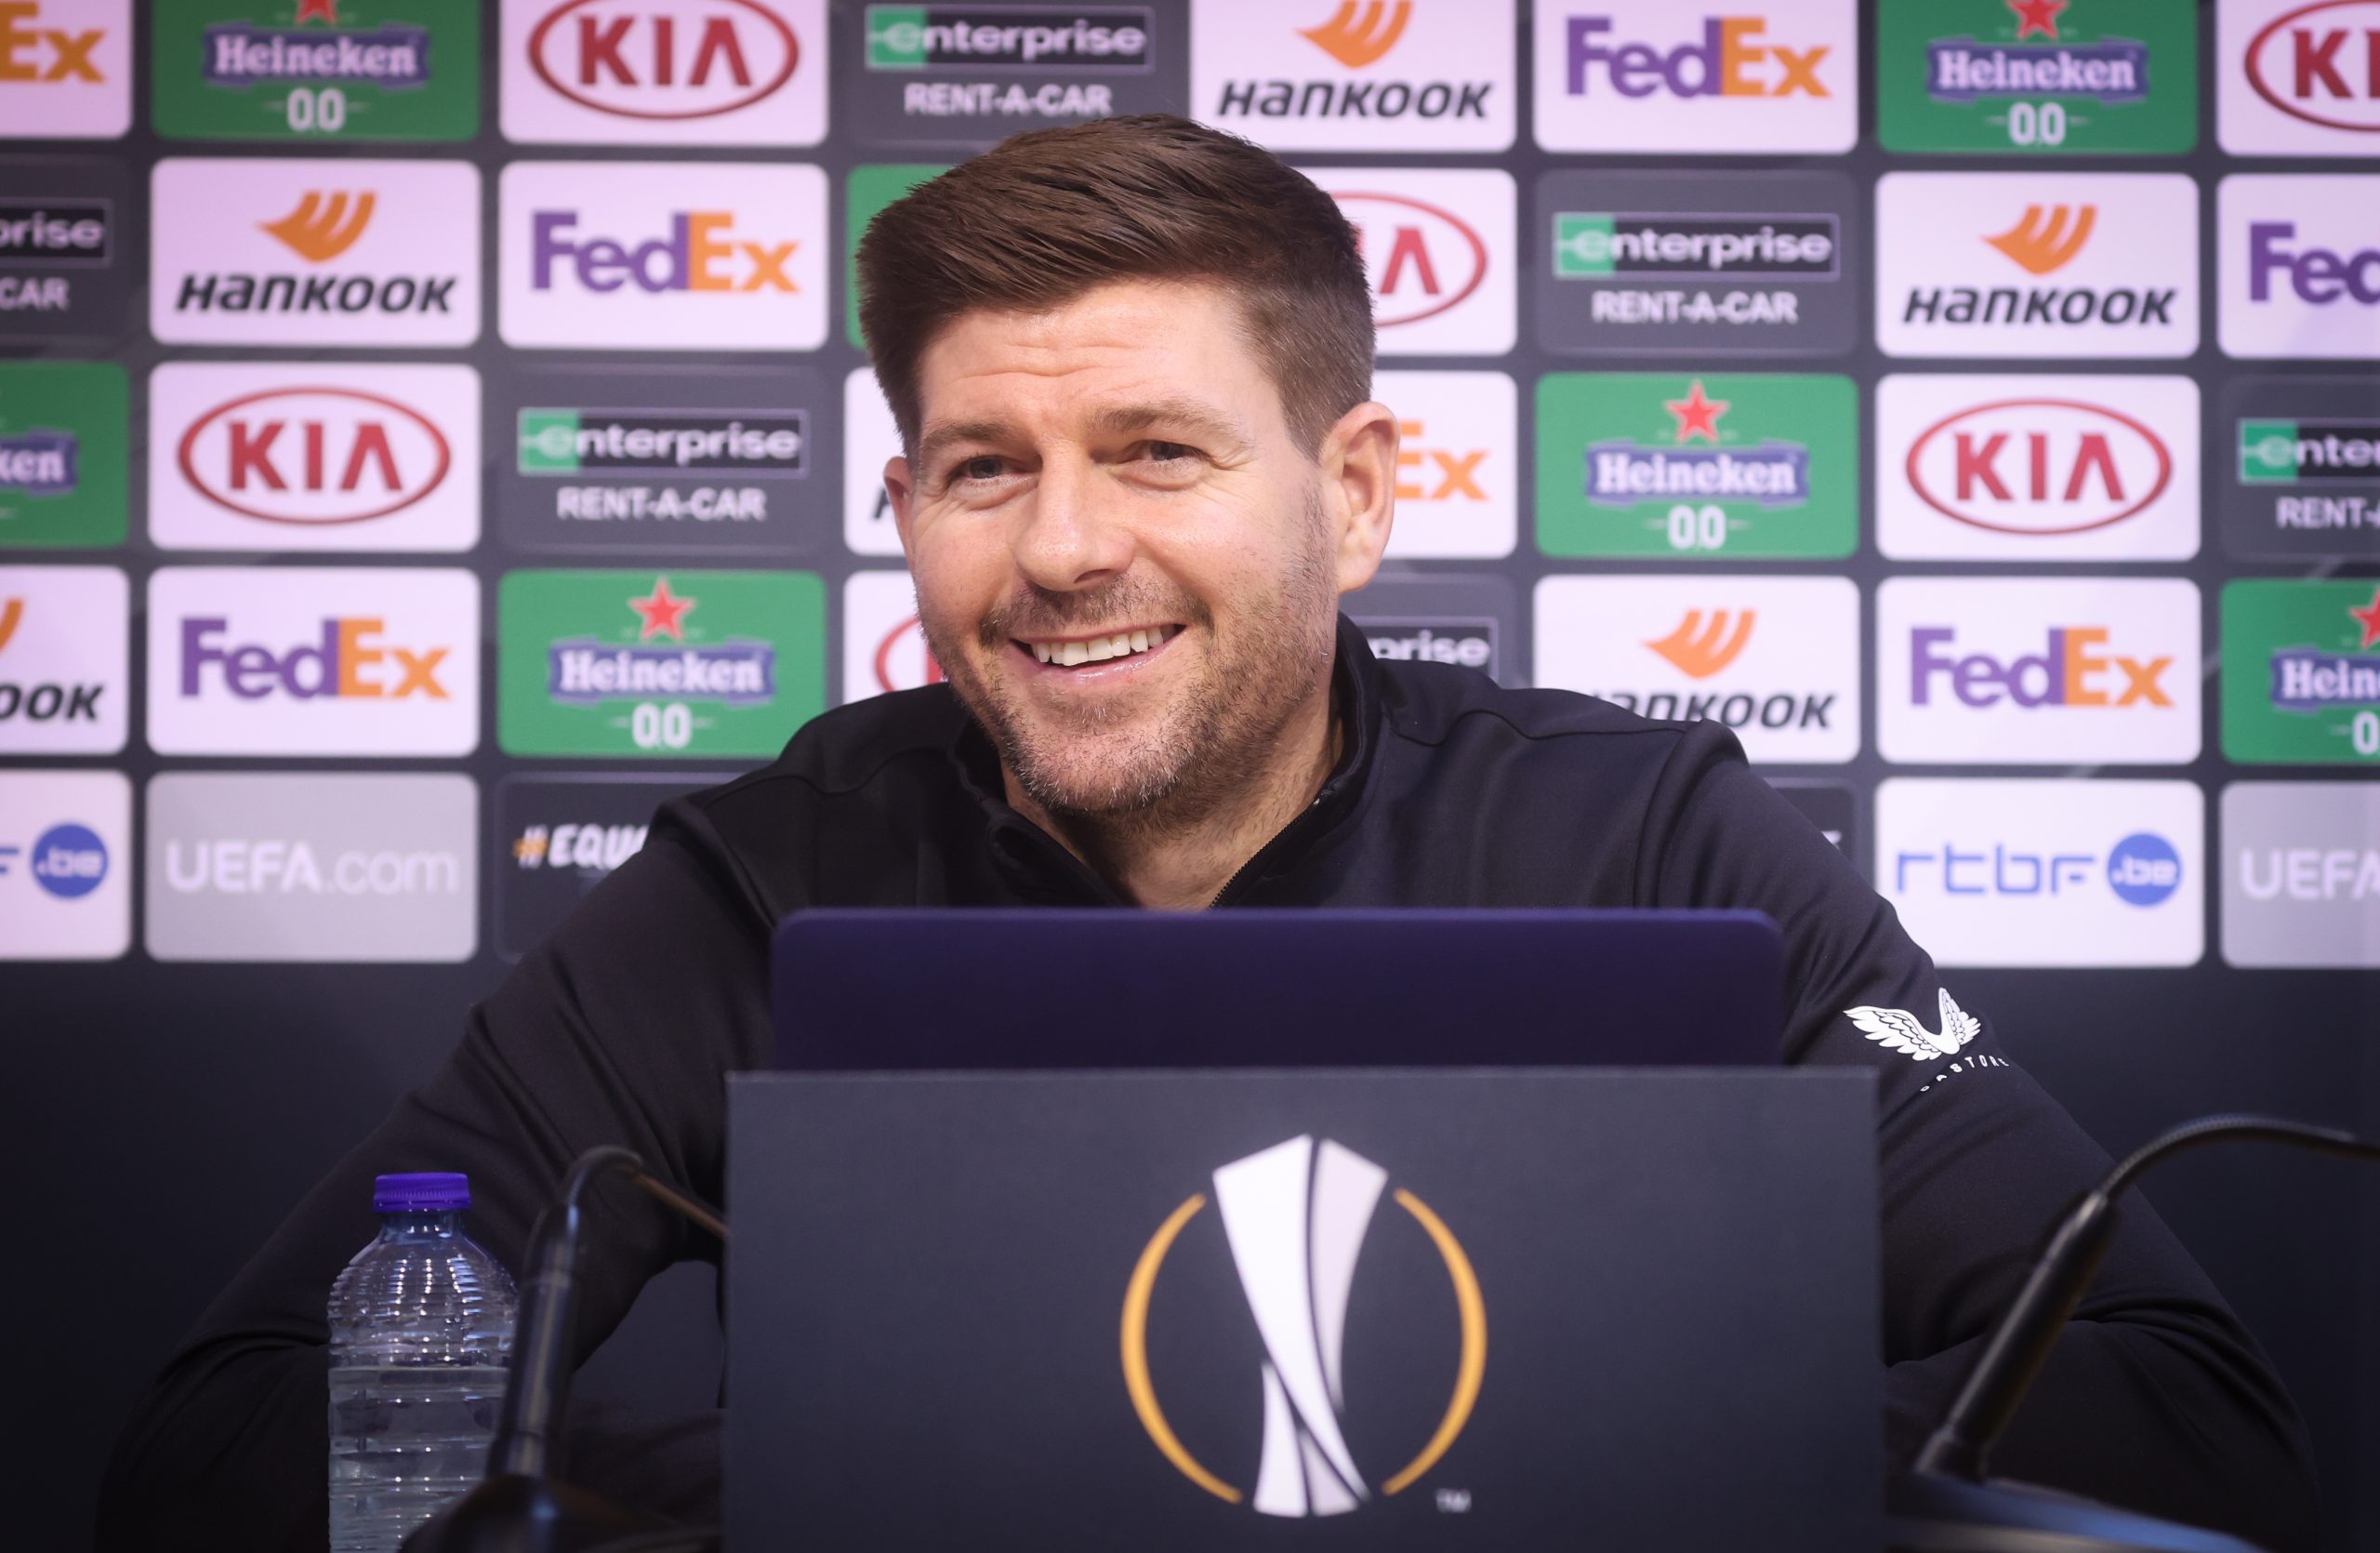 Rangers' head coach Steven Gerrard pictured during a press conference of Scotish club Rangers FC, Wednesday 21 October 2020, in Liege. Tomorrow they will meet Belgian soccer Standard de Liege in the first day of the group phase (group D) of the UEFA Europa League competition. BELGA PHOTO VIRGINIE LEFOUR